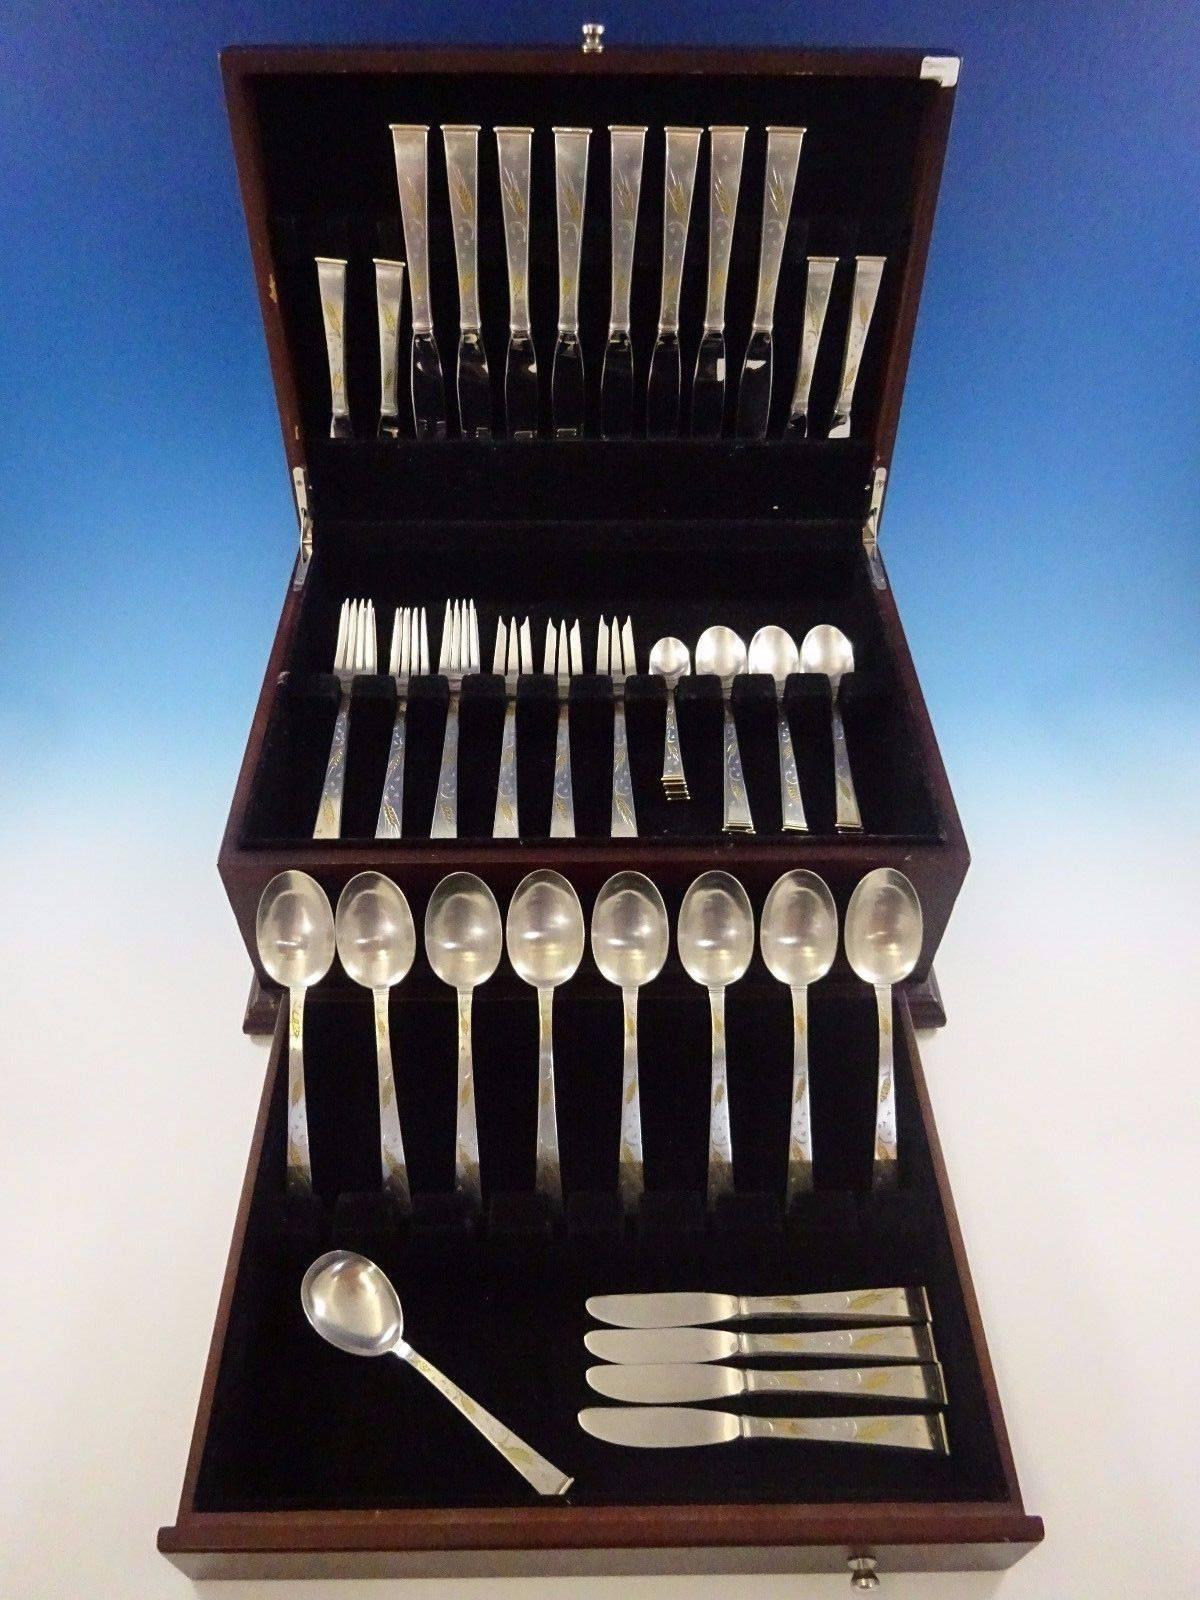 Golden wheat by Gorham sterling silver flatware set of 57 pieces. This set includes:

Eight knives, 9